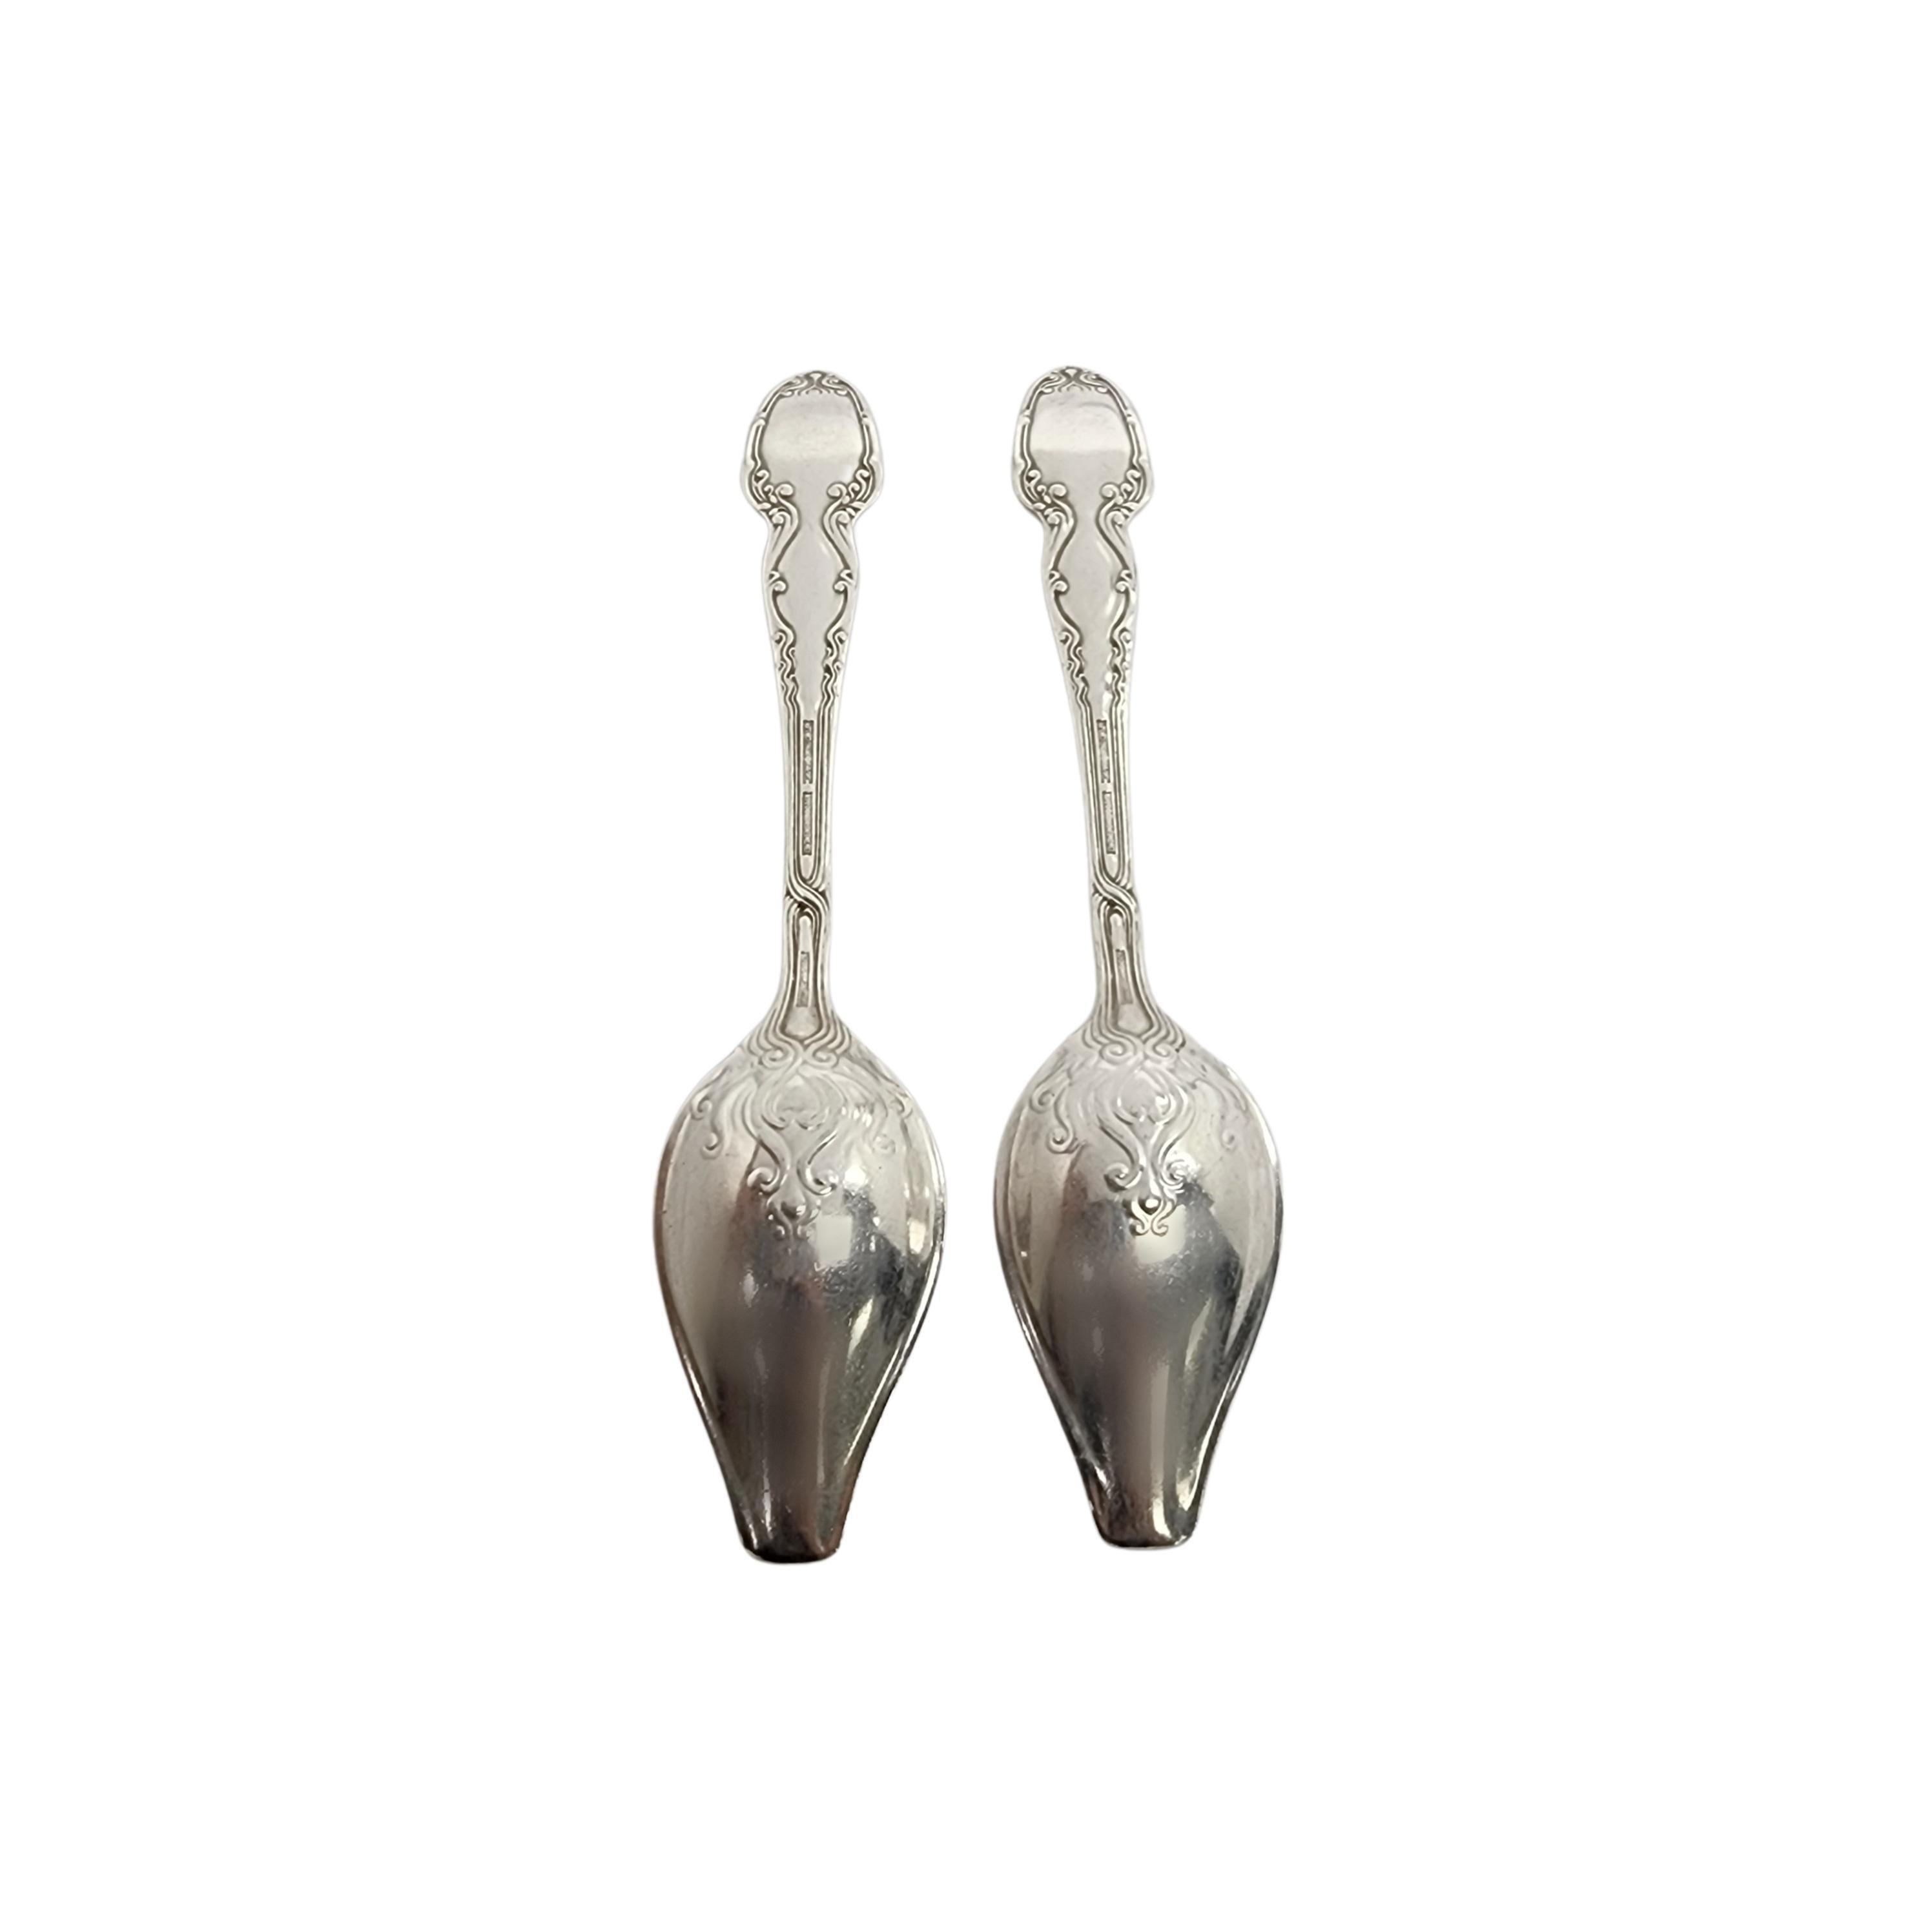 Set of 2 Tiffany & Co sterling silver grapefruit spoons in the Broom Corn pattern by Tiffany & Co with monogram.

Monogram appears to be ABH

Beautiful and unique grapefruit spoons in Tiffany's intricate and decorative Broom Corn pattern, designed